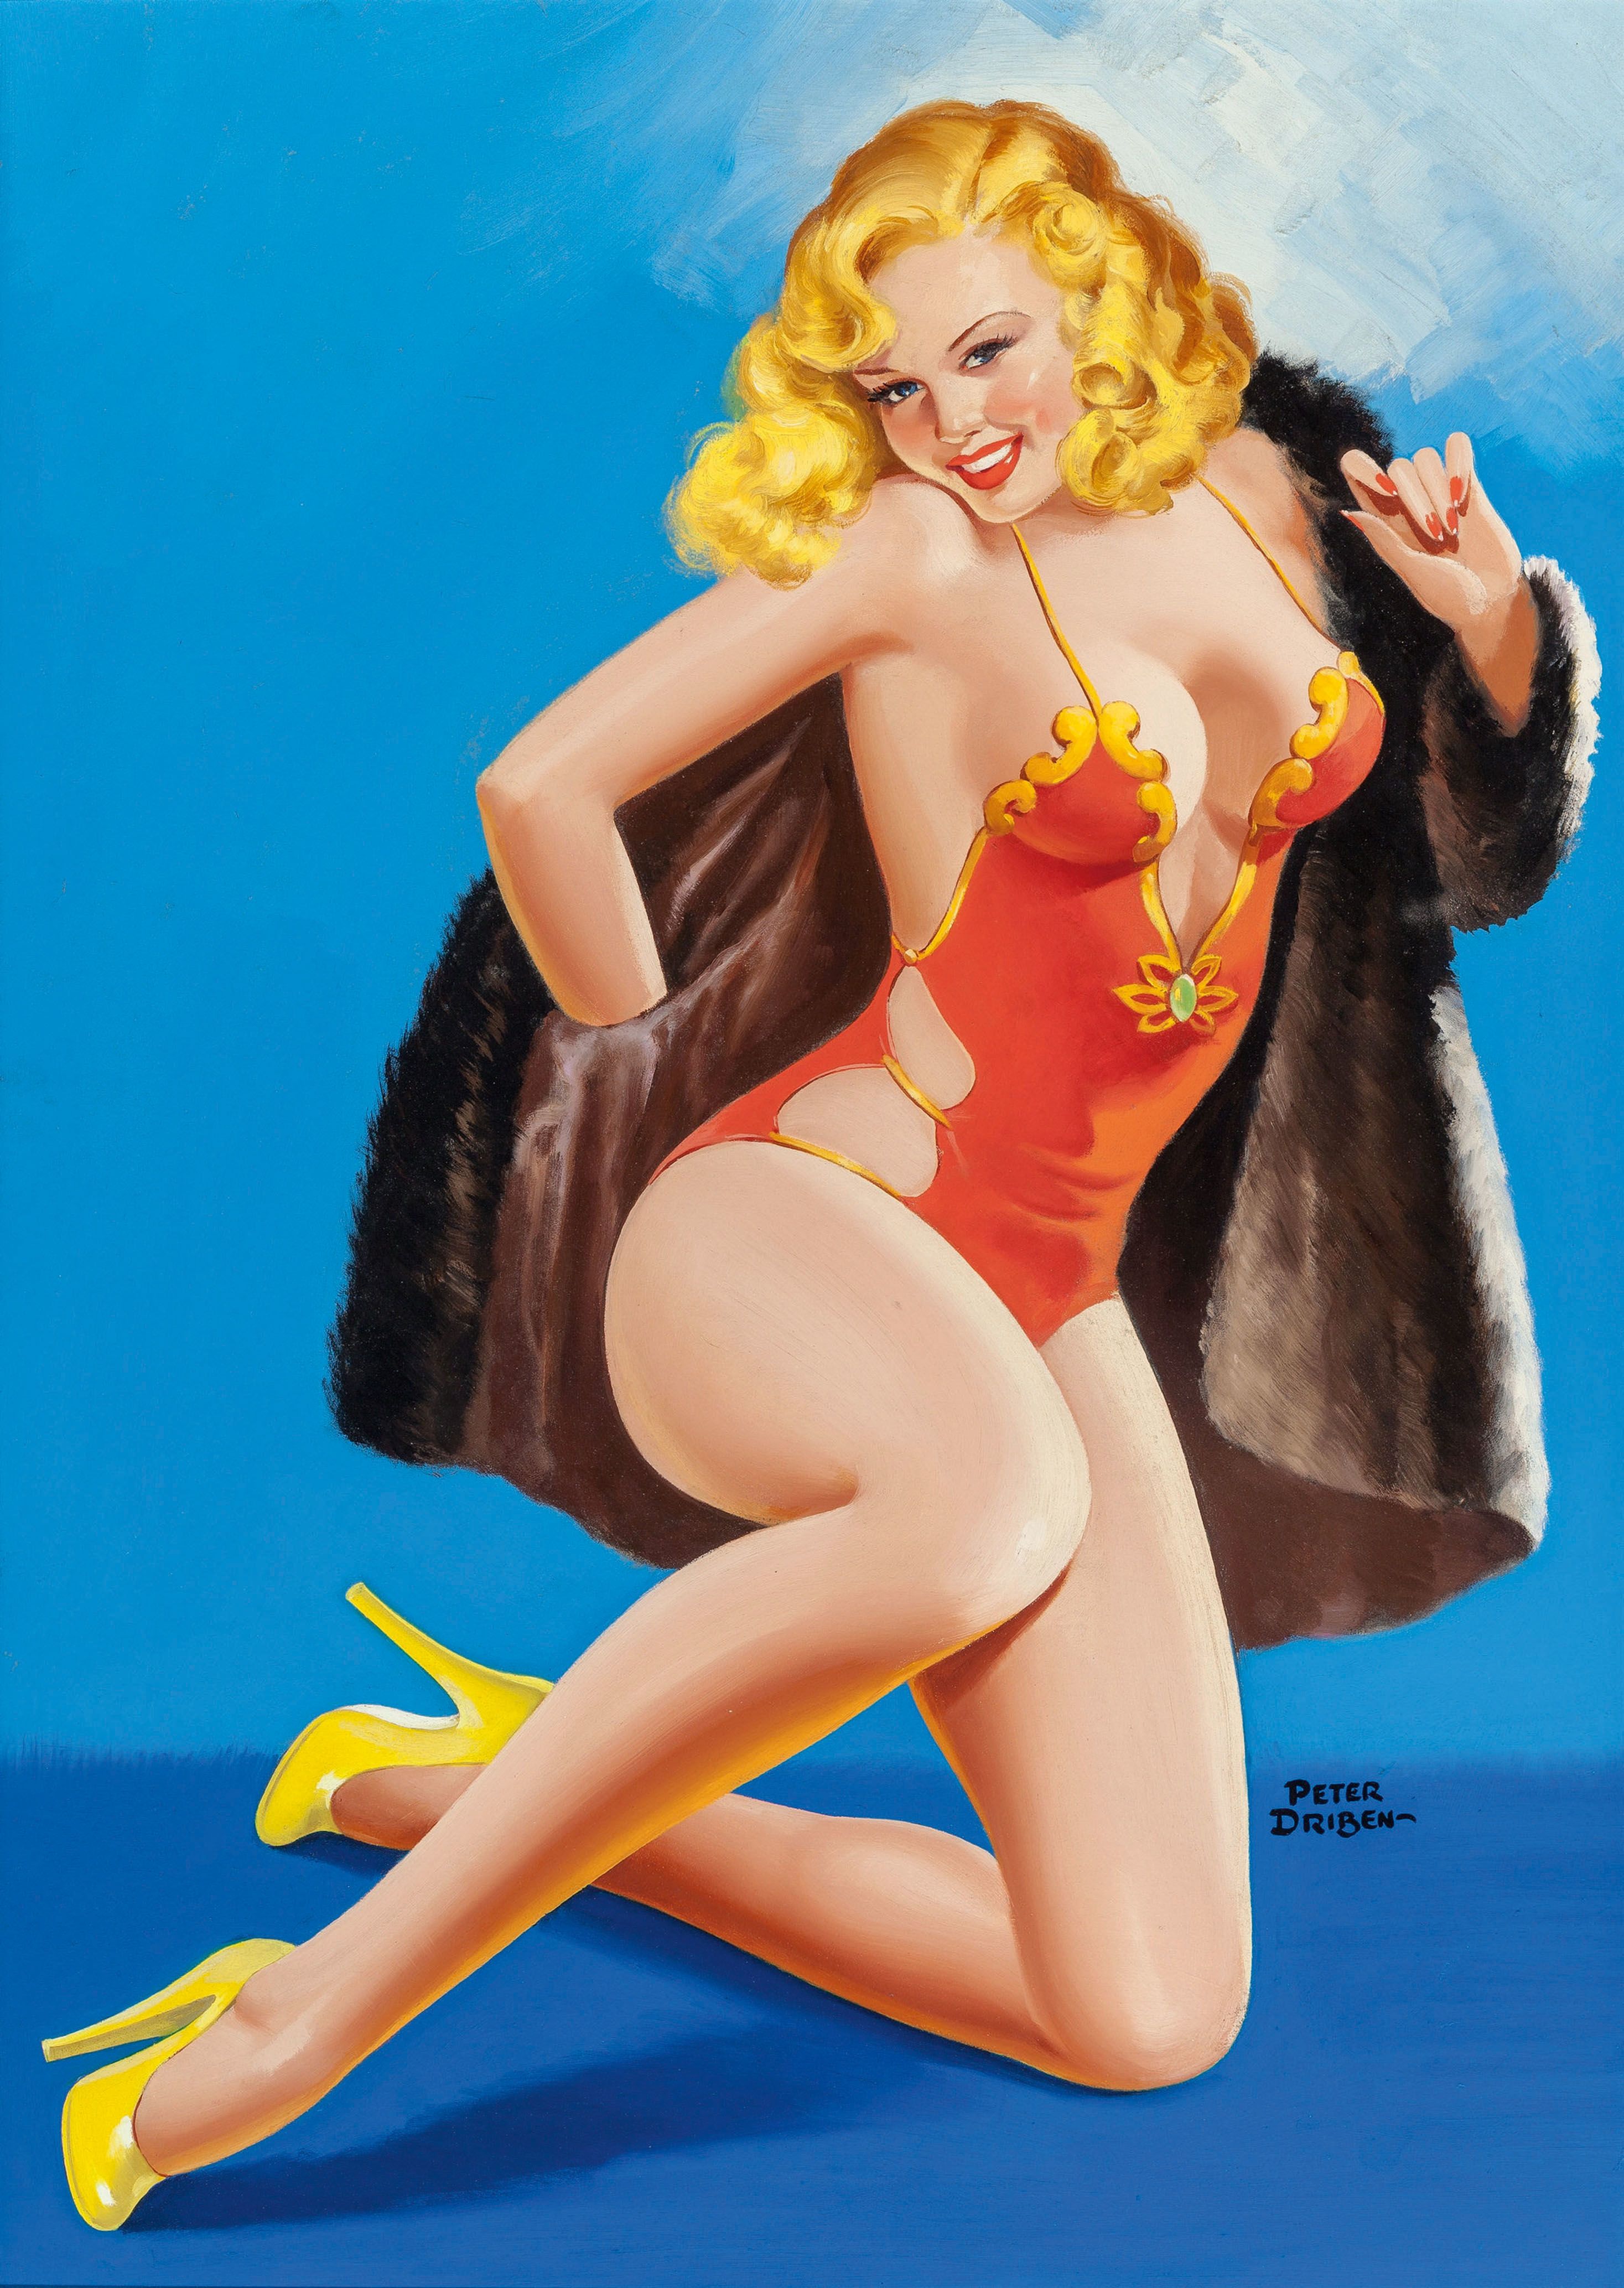 Sexy Vintage Pinups - The lost art of the American pin-up | CNN